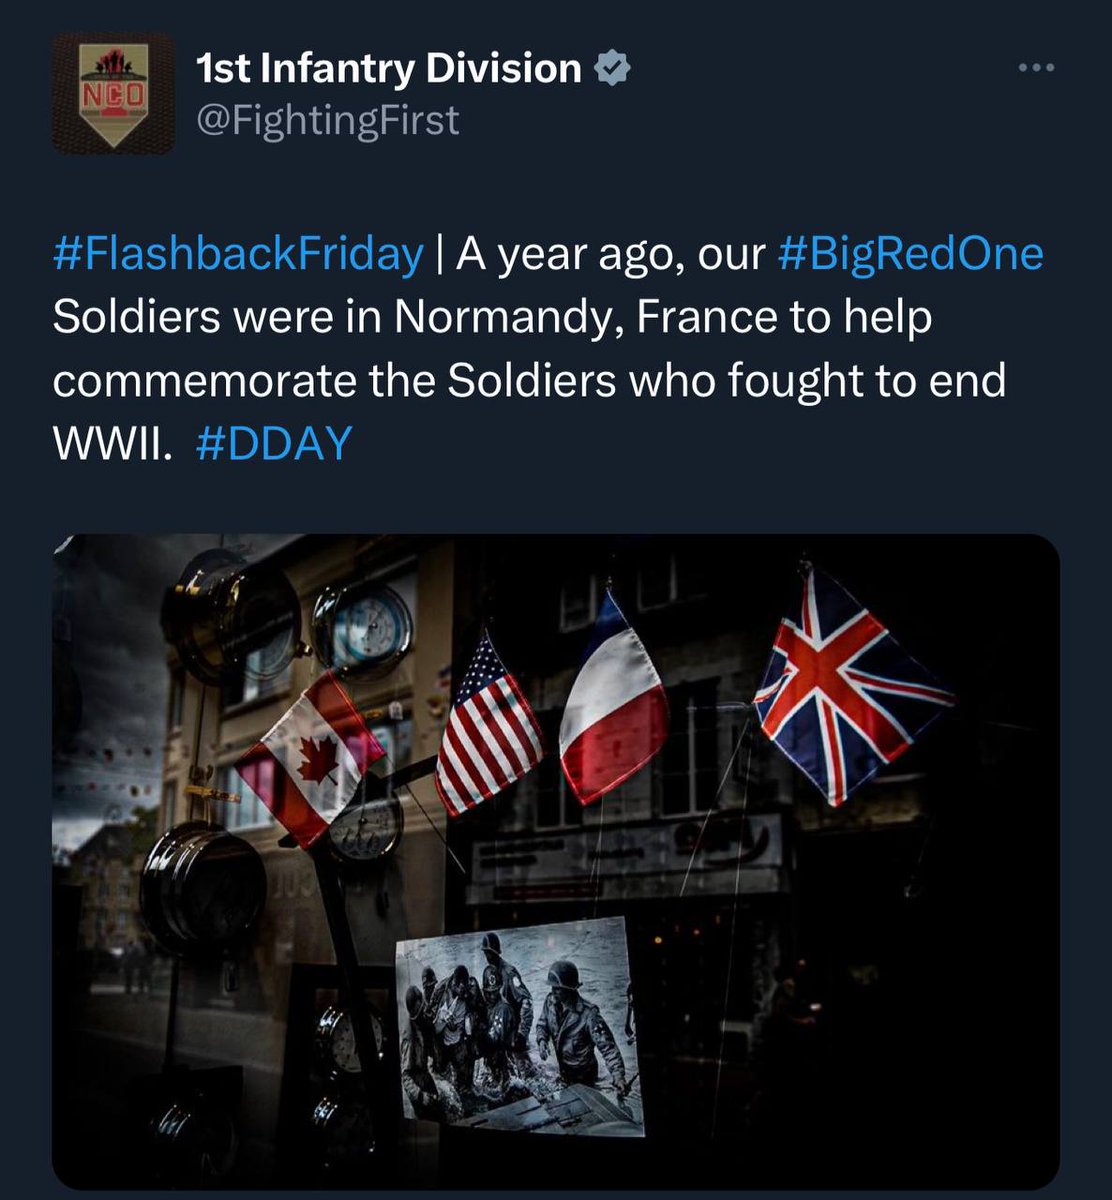 U.S Army First Infantry Division 🇺🇸

#FlashbackFriday | A year ago, our #BigRedOne Soldiers were in Normandy, France to help commemorate the Soldiers who fought to end WWII.
 #DDAY 

Timestamp: 7:33 ET>19:33 MIL
Tweet